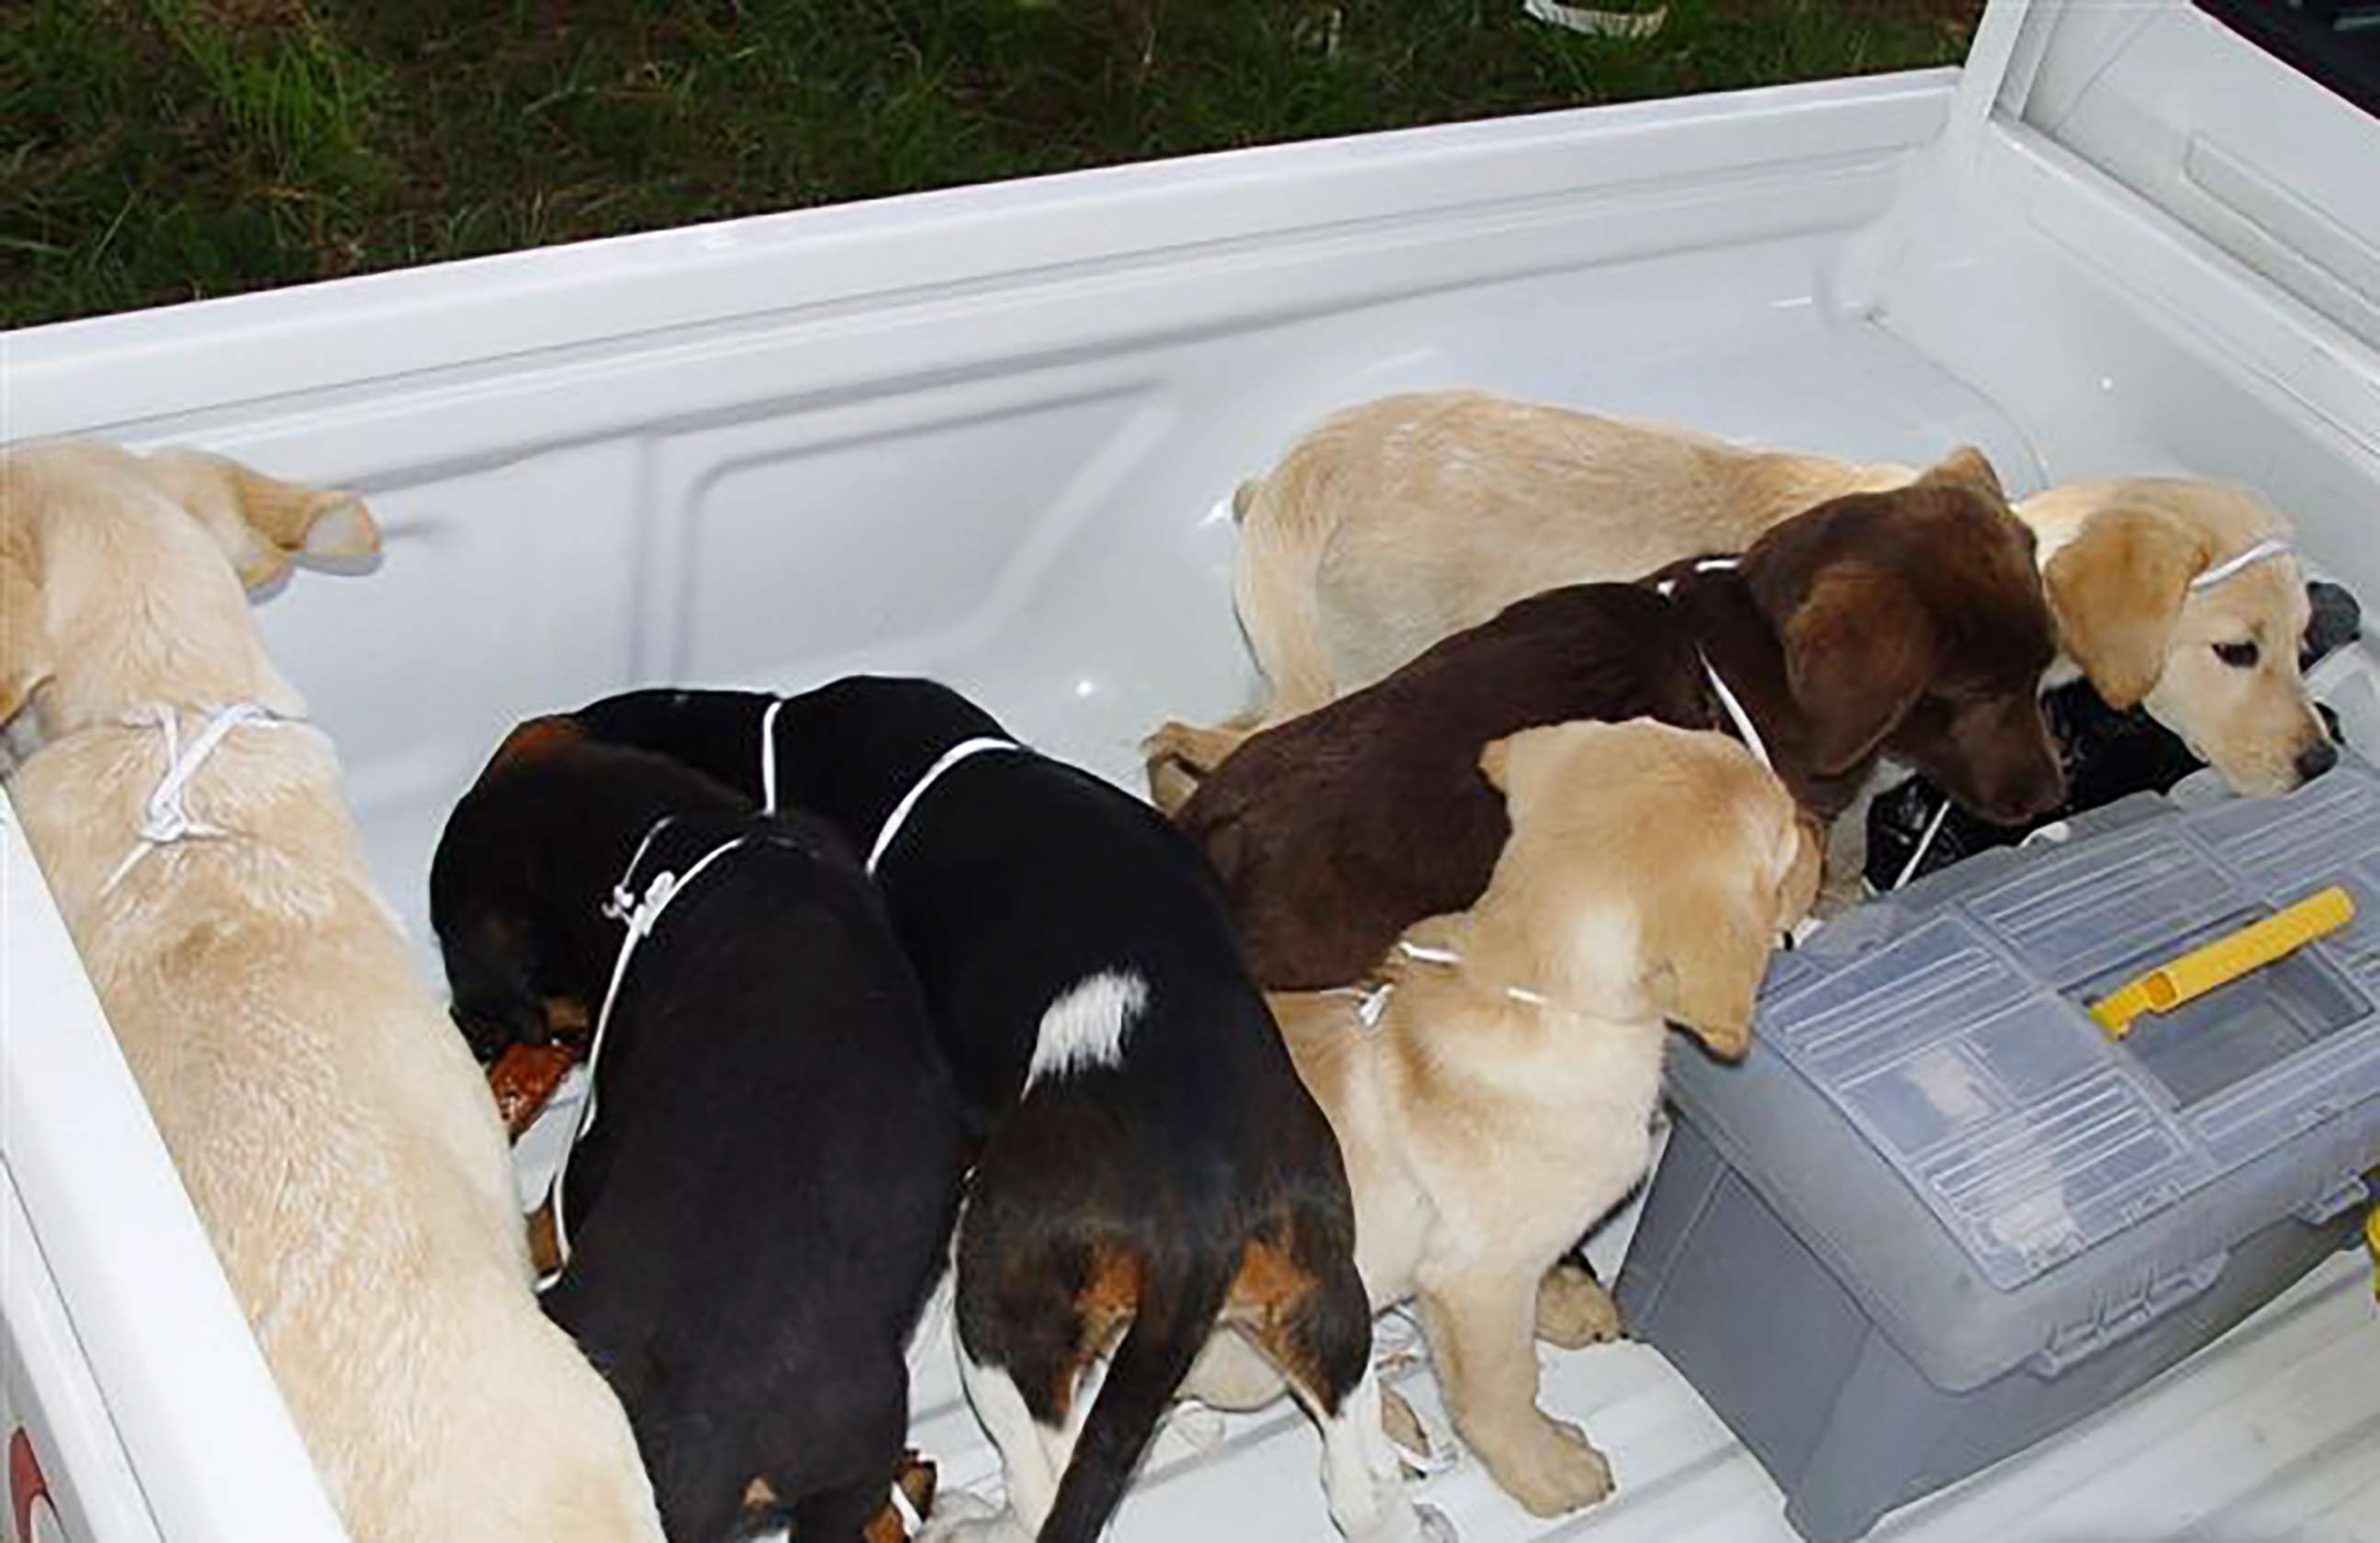 PHOTO: Several of the canine couriers were saved, according to the DEA.